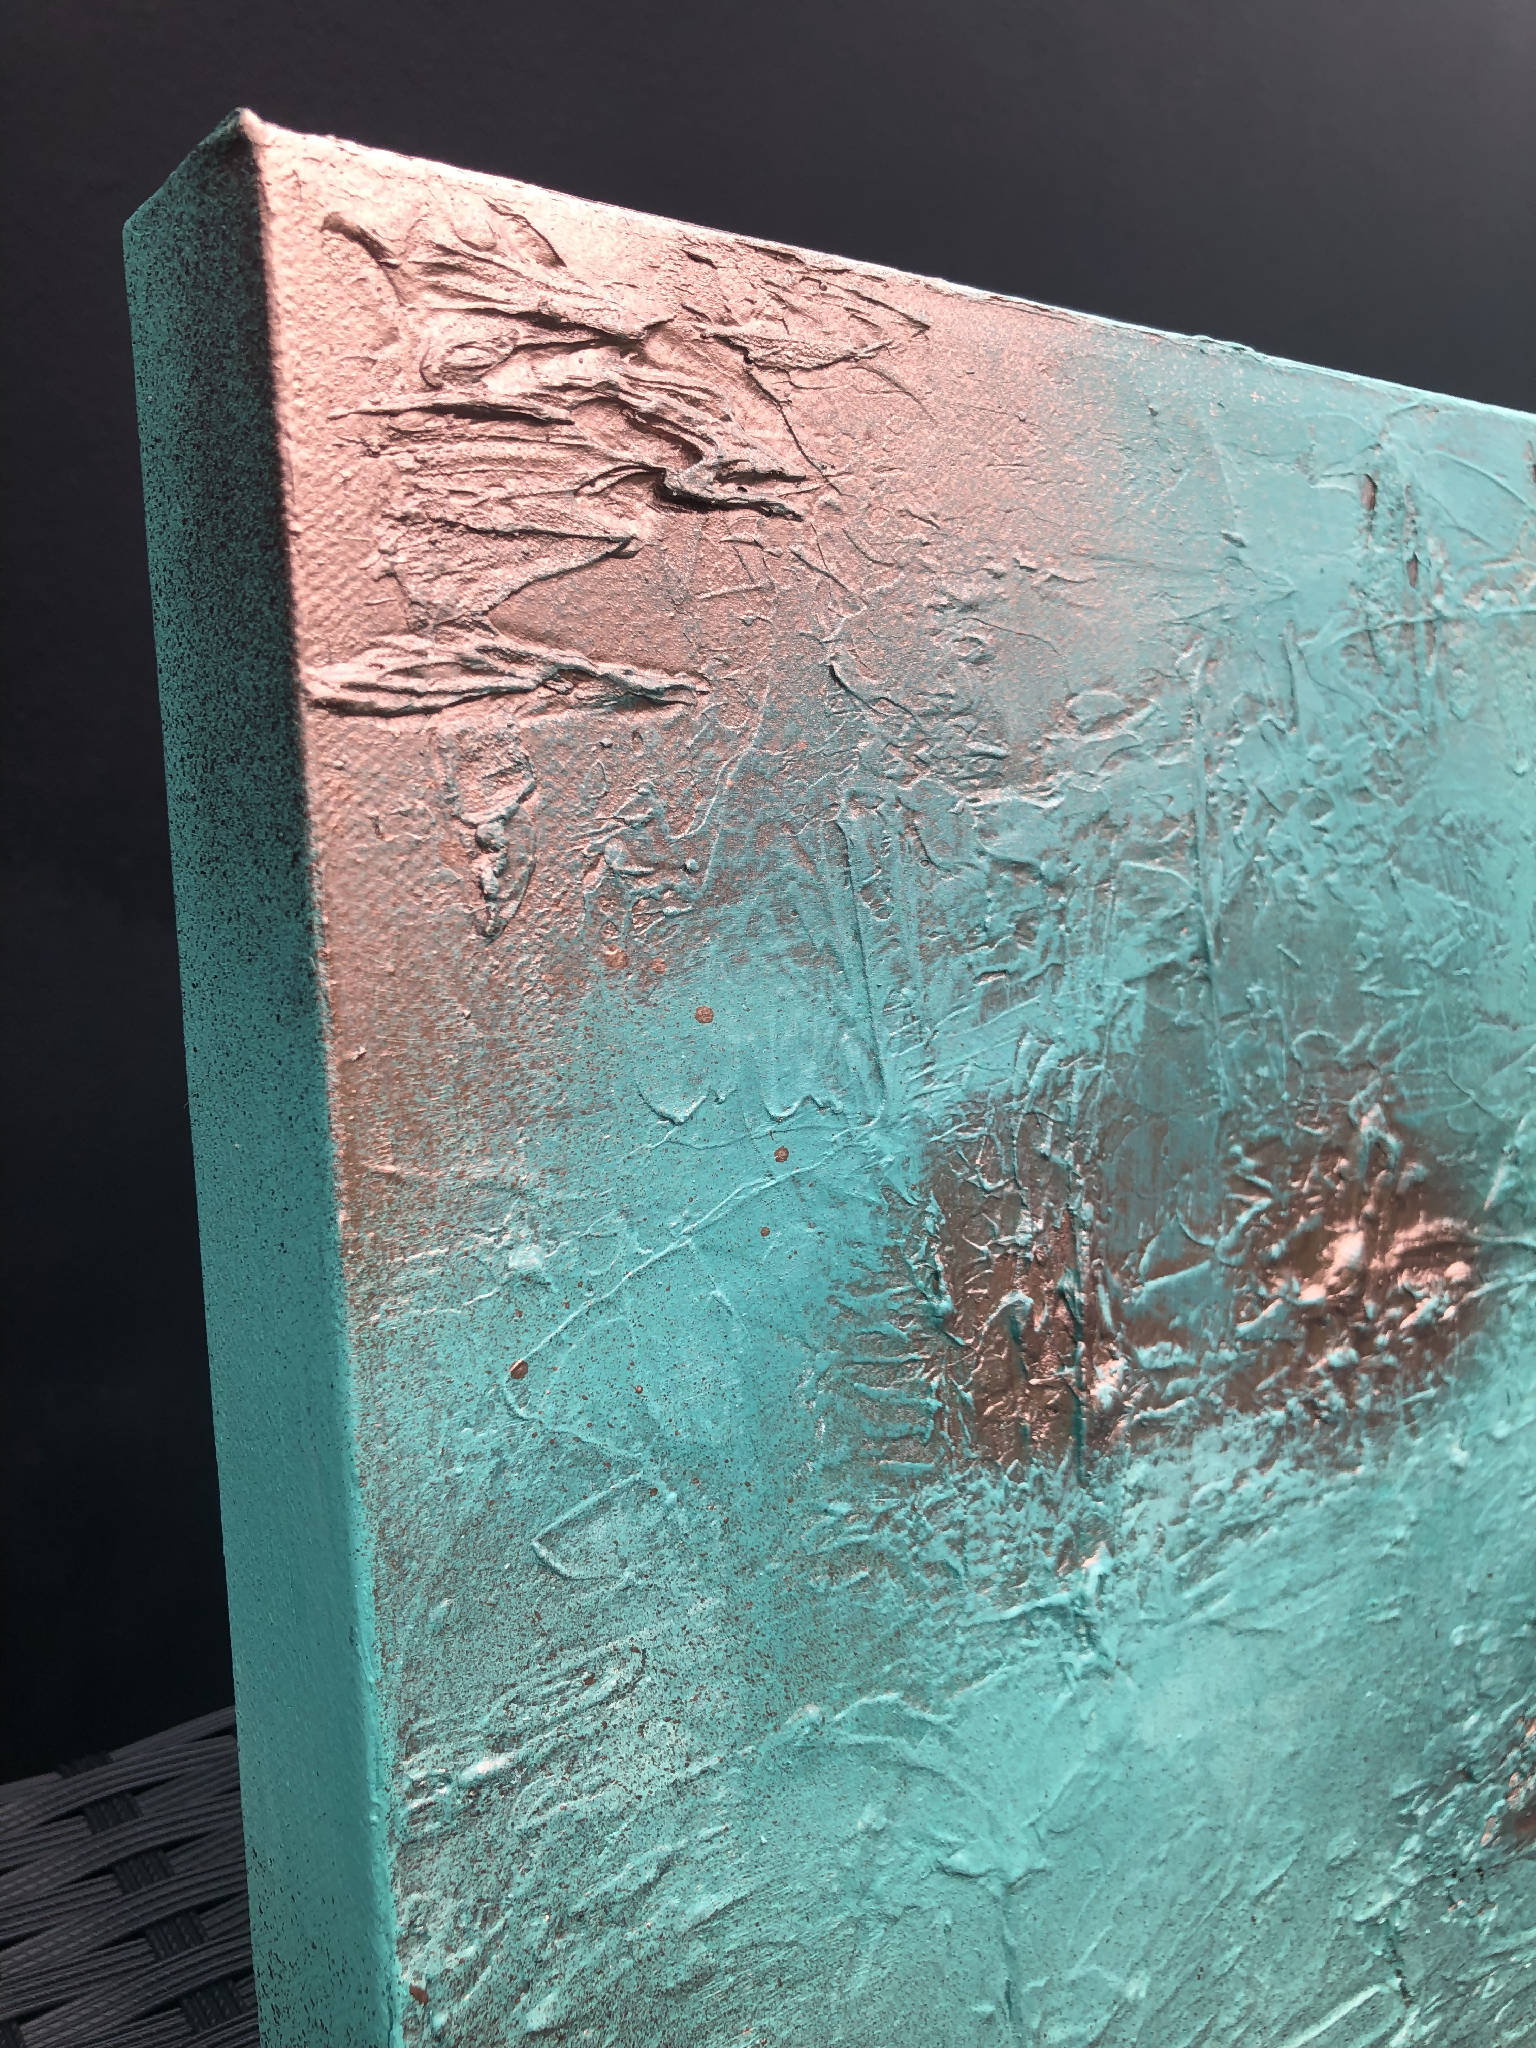 DELUXE PATINA - Pair of heavily textured copper patina canvases (97x56x4cm)